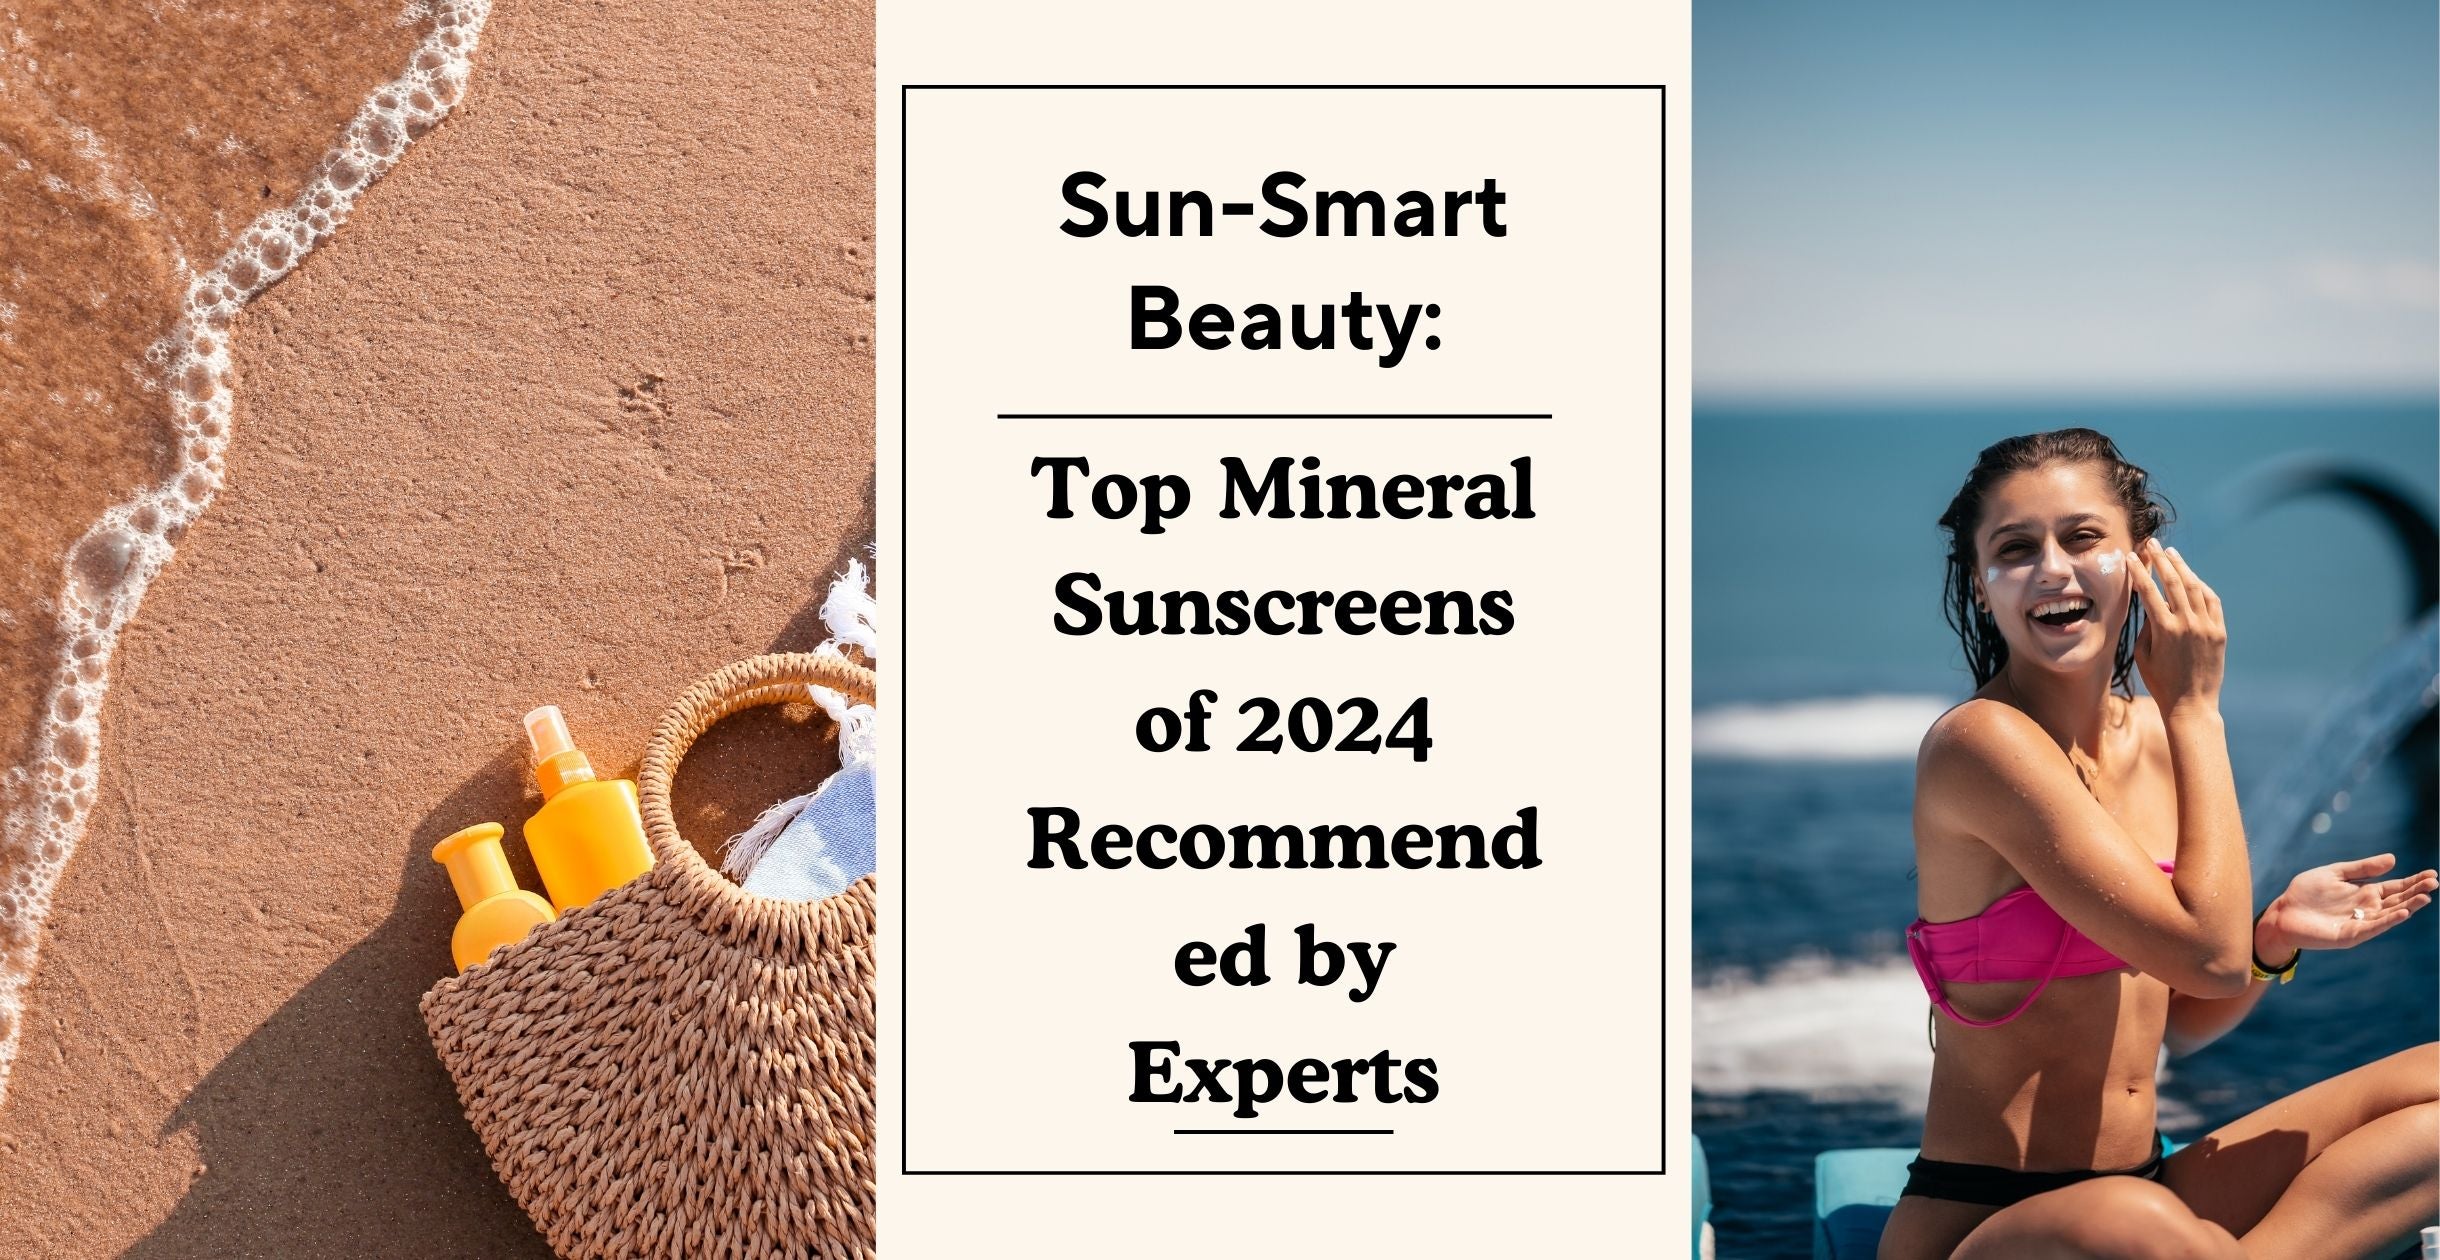 Sun-Smart Beauty: Top Mineral Sunscreens of 2024 Recommended by Experts